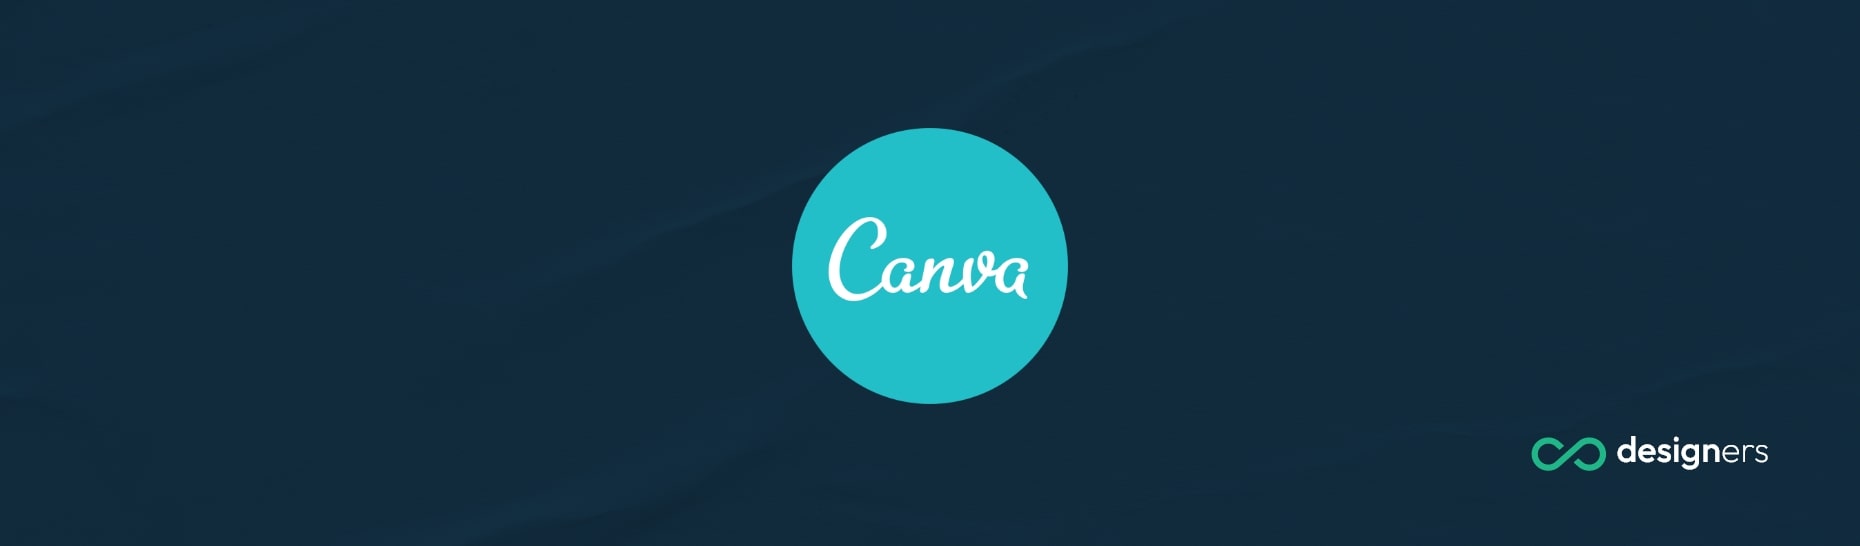 How Do I Add Favorites in Canva?